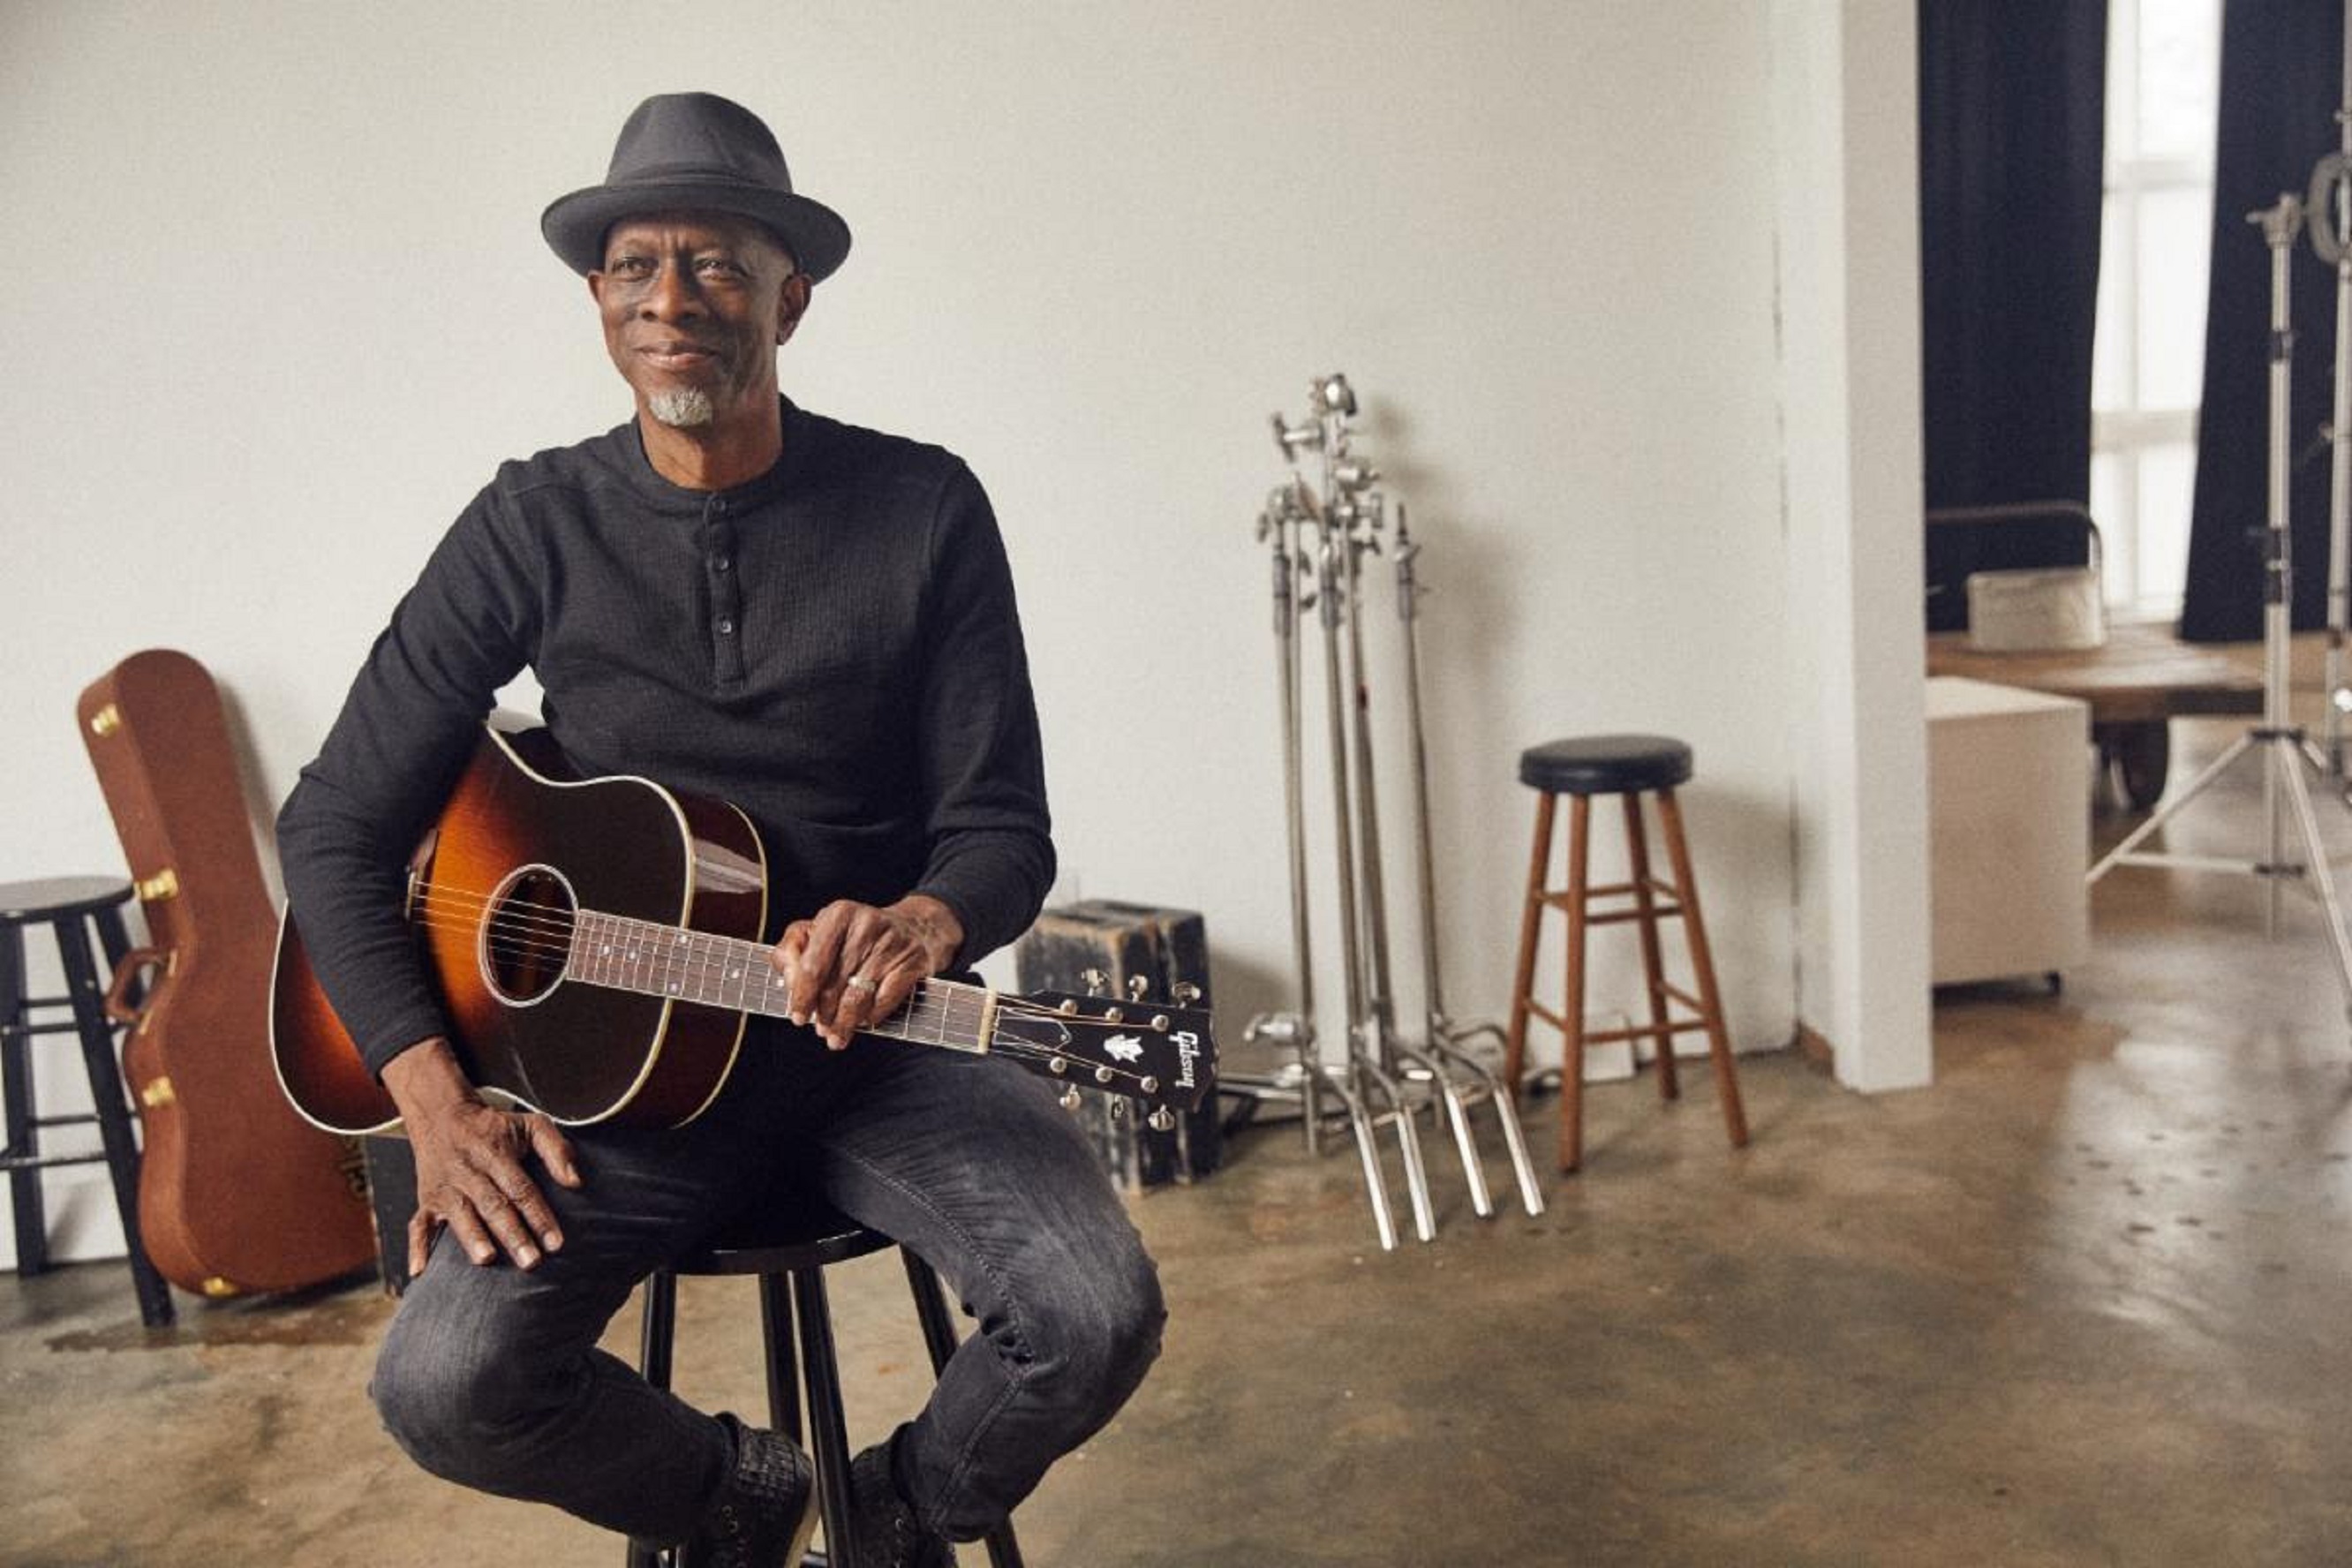 Gibson Unveils New Keb’ Mo’ J-45, Third Collaboration with World-Renowned Guitarist